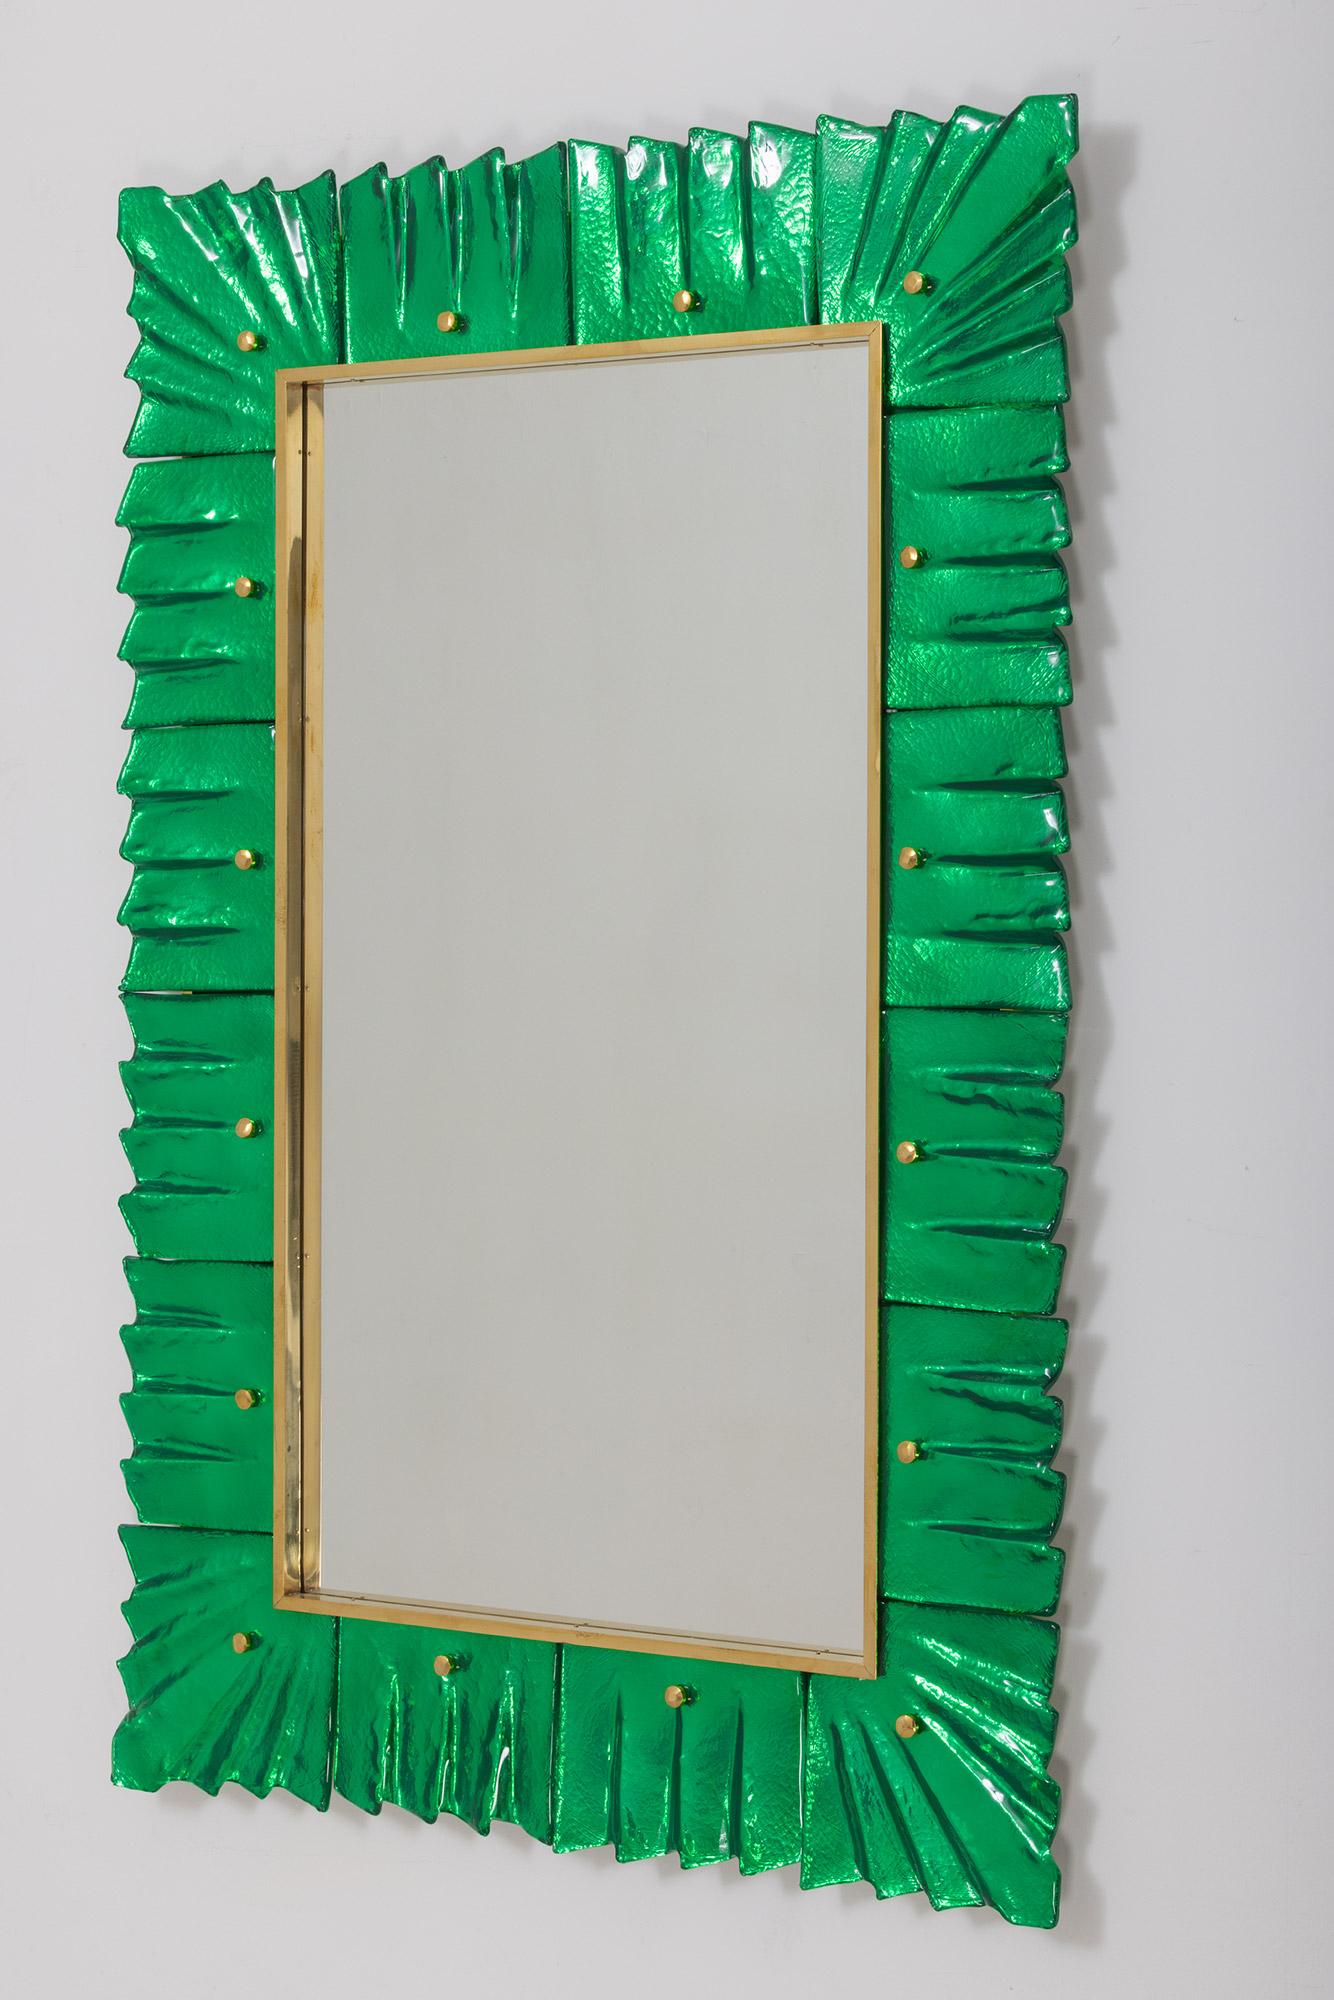 Rectangular contemporary Murano emerald green glass framed mirrors, in stock.
Rectangular mirror plate surrounded with undulating glass tiles in emerald green color held by brass cabochons. 
Handcrafted by a team of artisans in Venice, Italy. 
Can